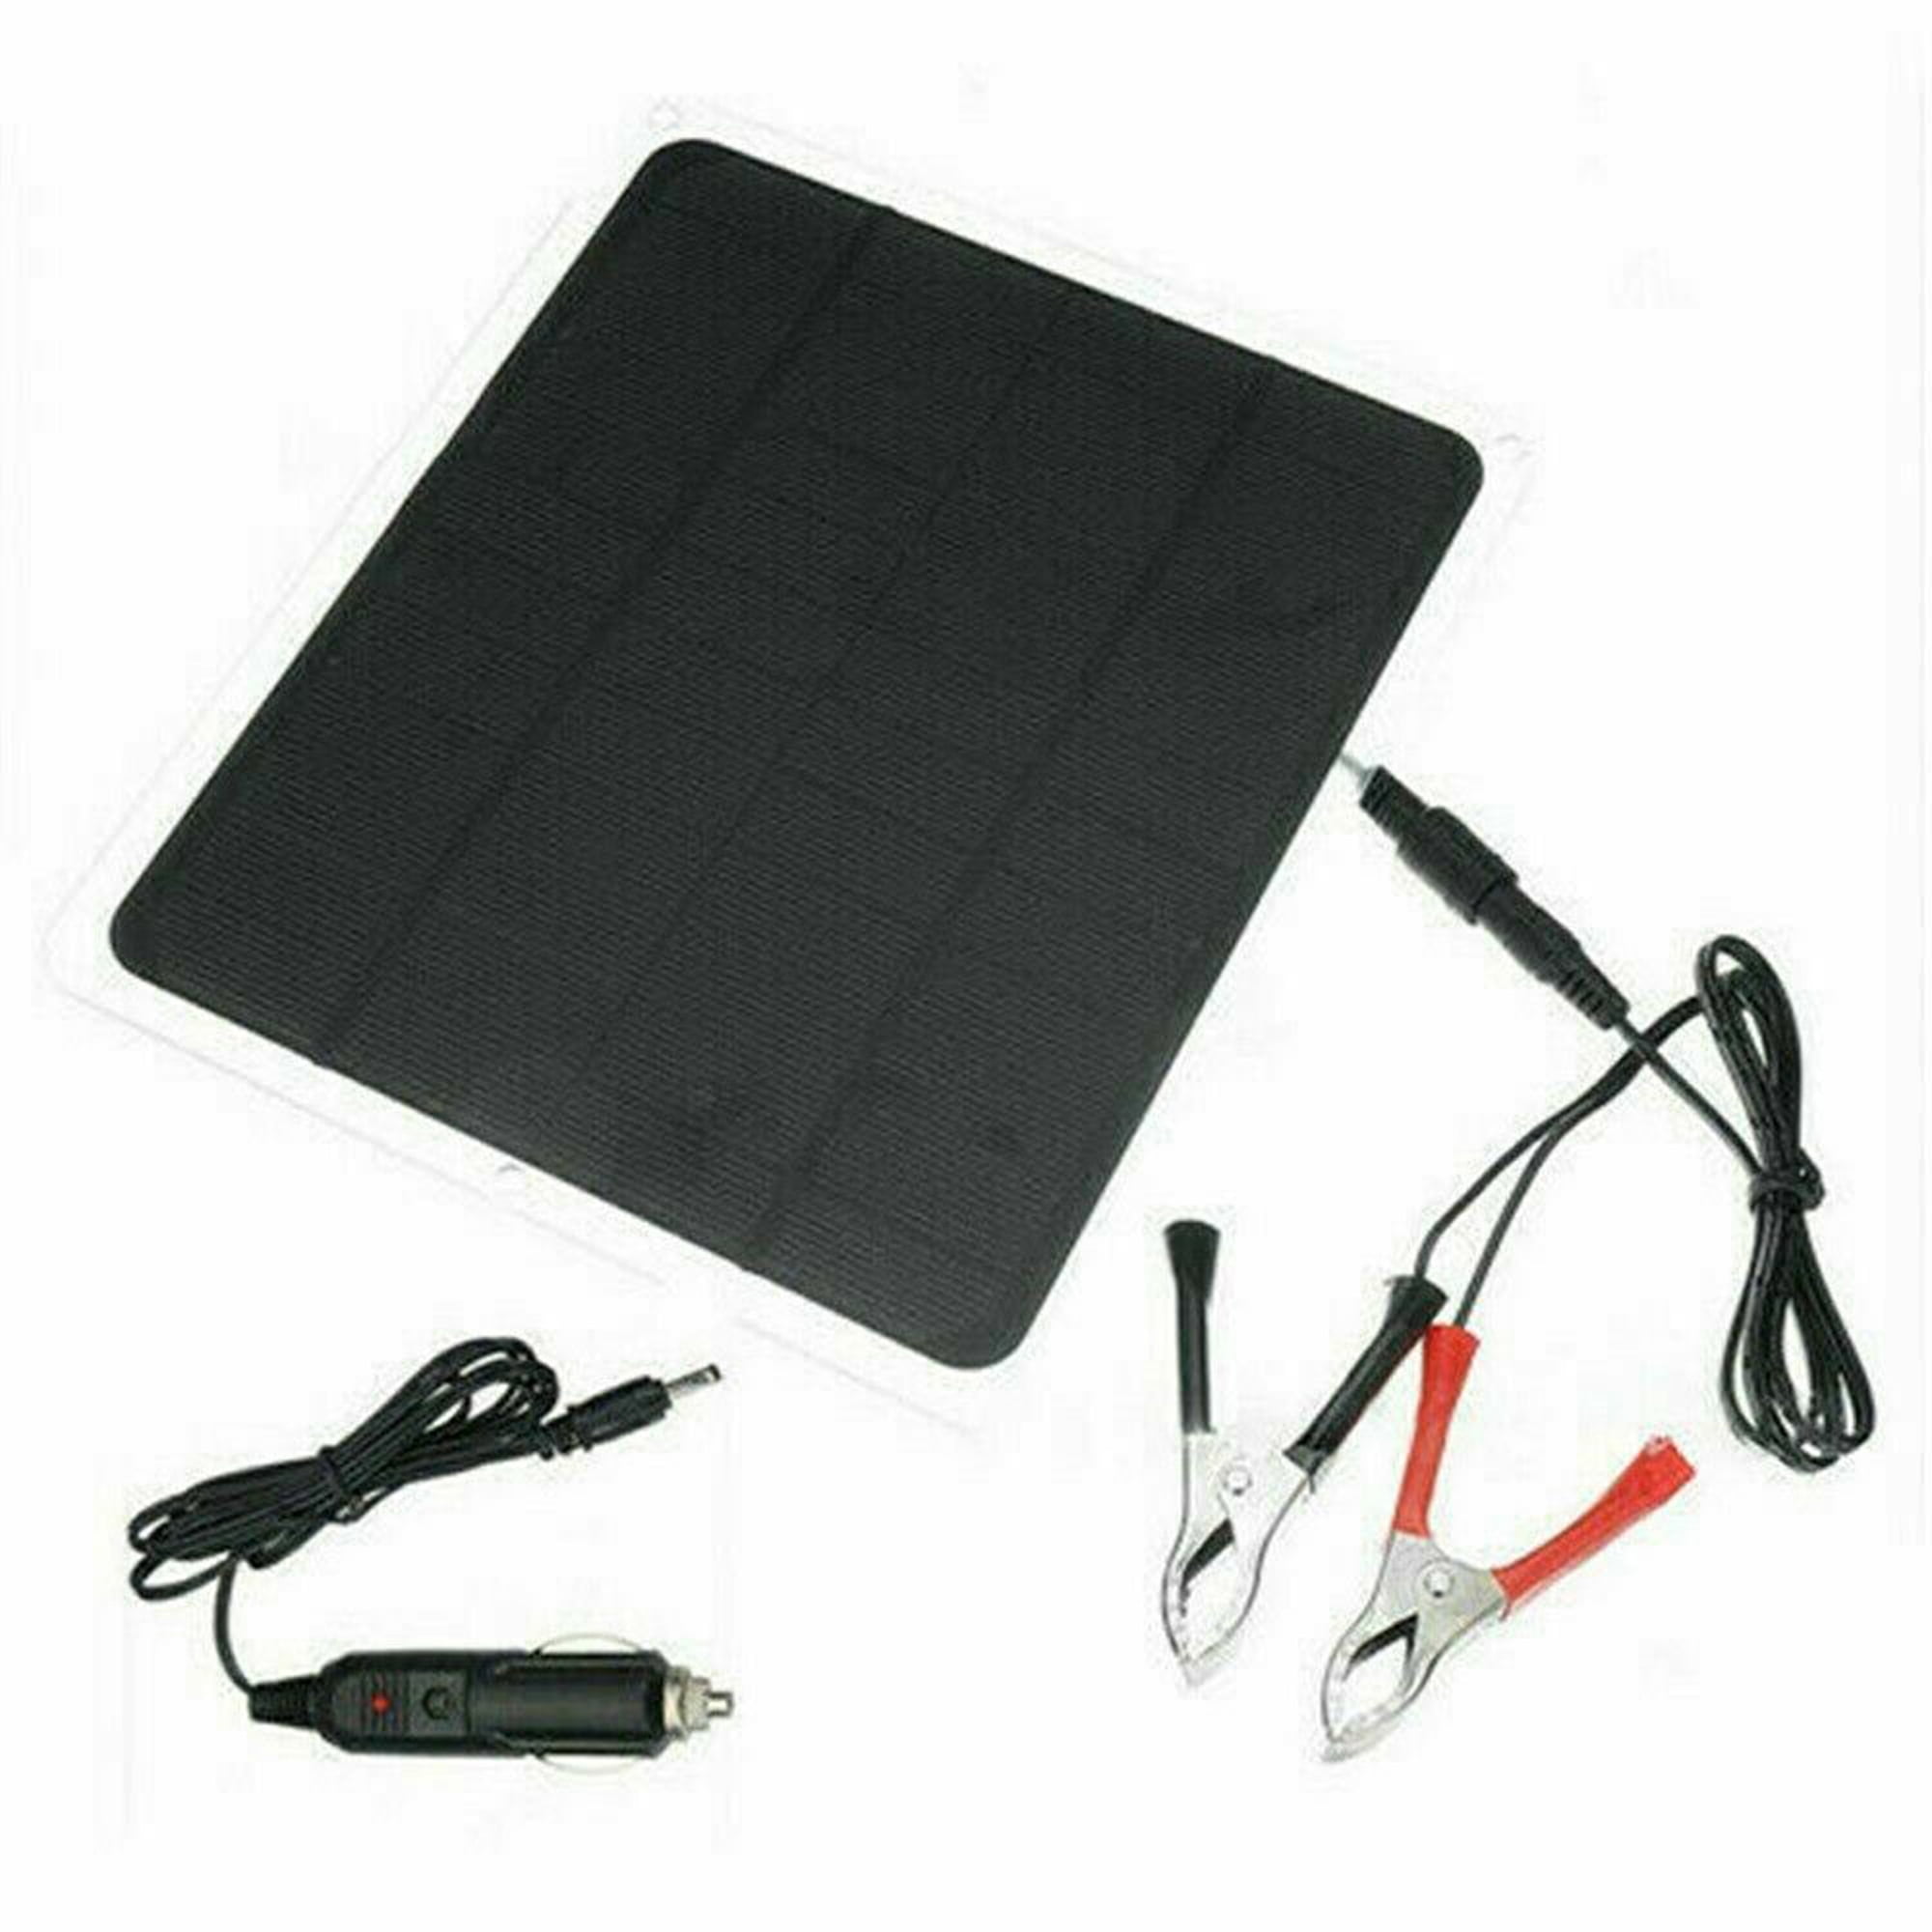 Boat Solar Battery Charger RV Automotive Snowmobile Marine 12V 15W Car Battery Trickle Charger Waterproof Portable Mono Solar Panel Battery Maintainer Kit for Motorcycle 